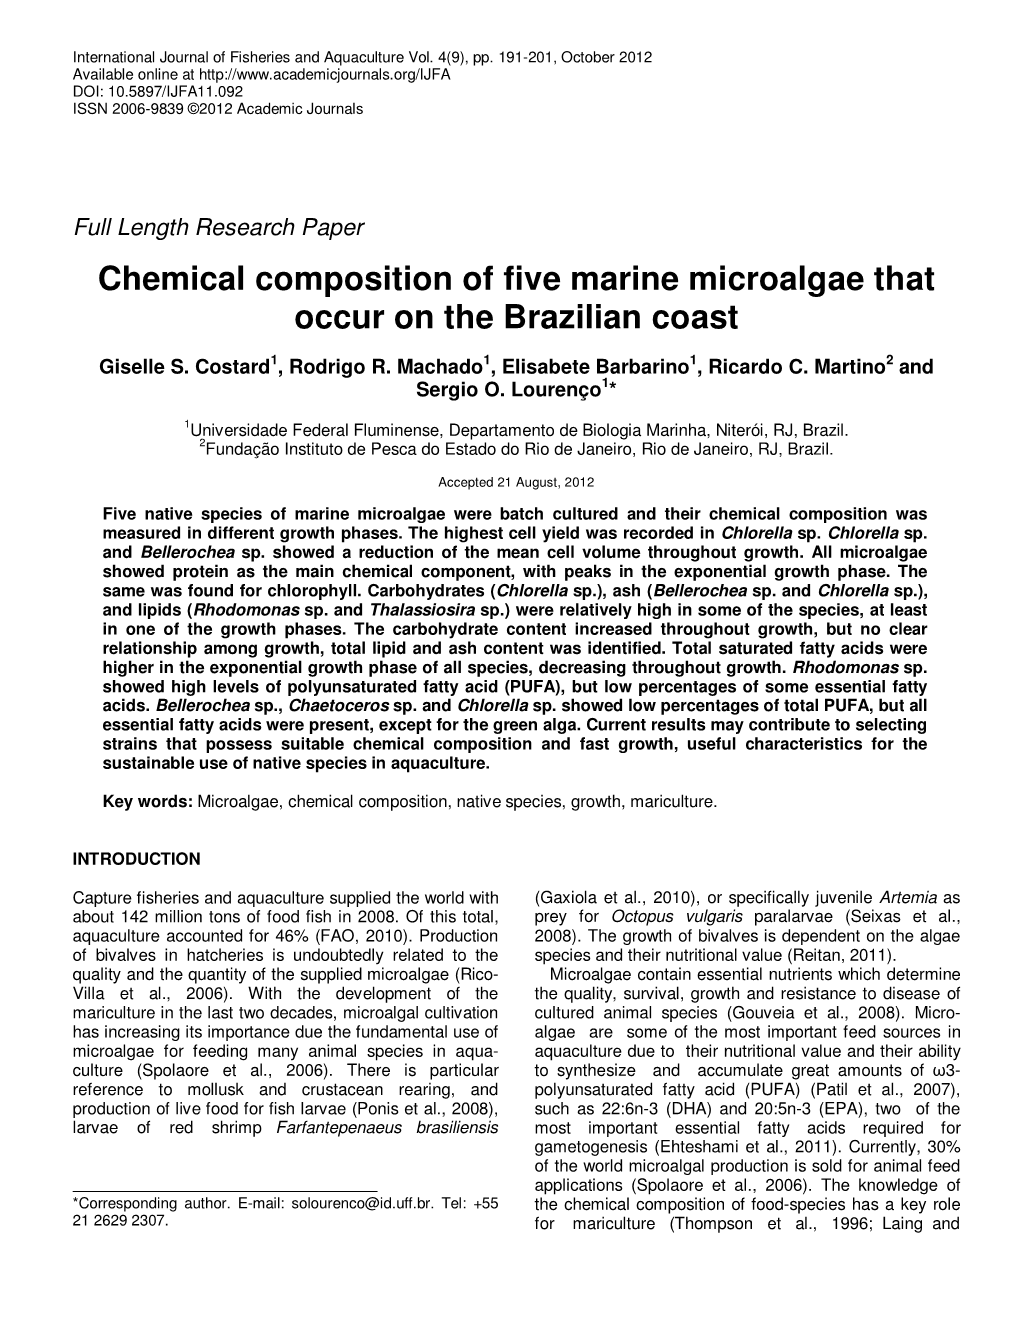 Chemical Composition of Five Marine Microalgae That Occur on the Brazilian Coast